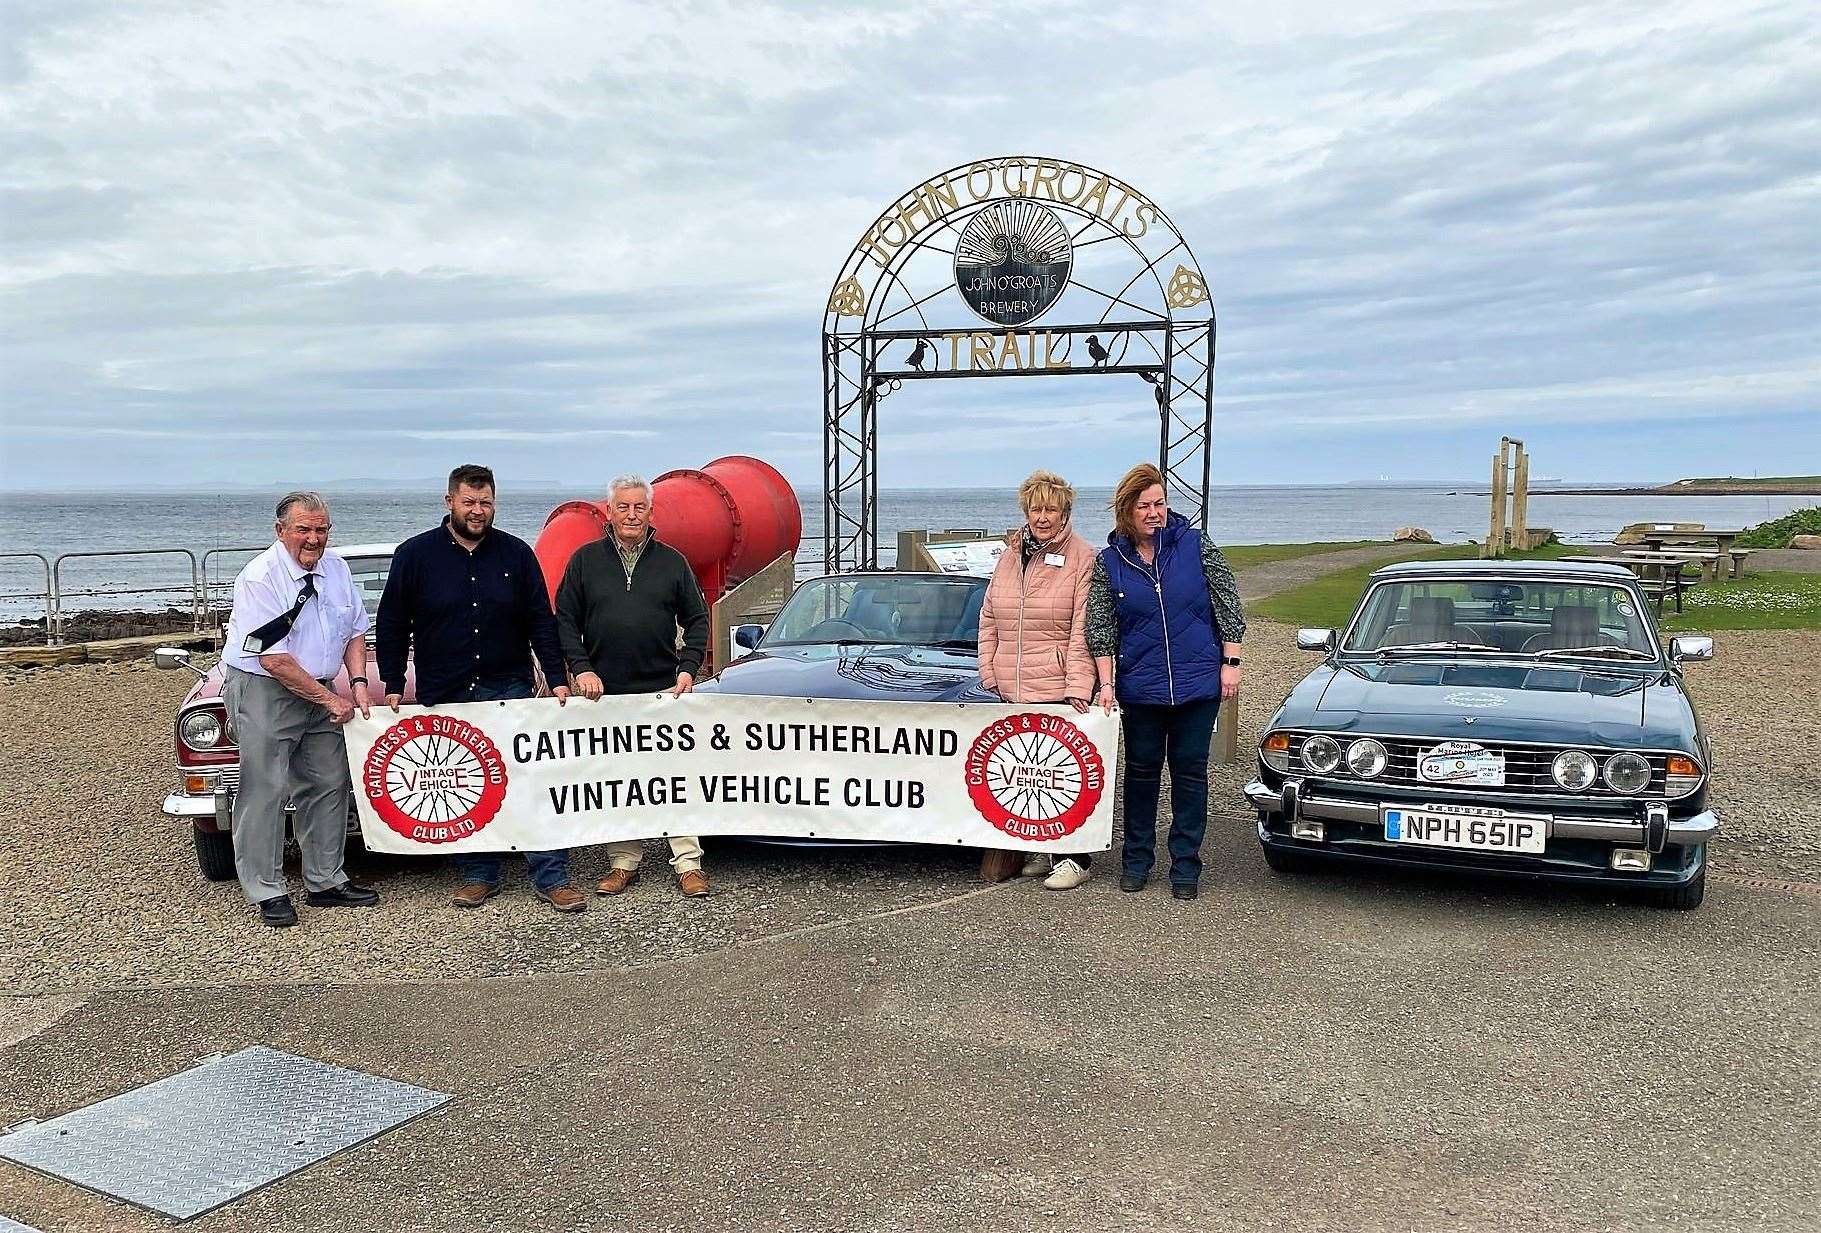 From left, Bert Macleod, James Green, Les Bremner, Ethel Green and Linda Johns at the finishing point in John O'Groats.